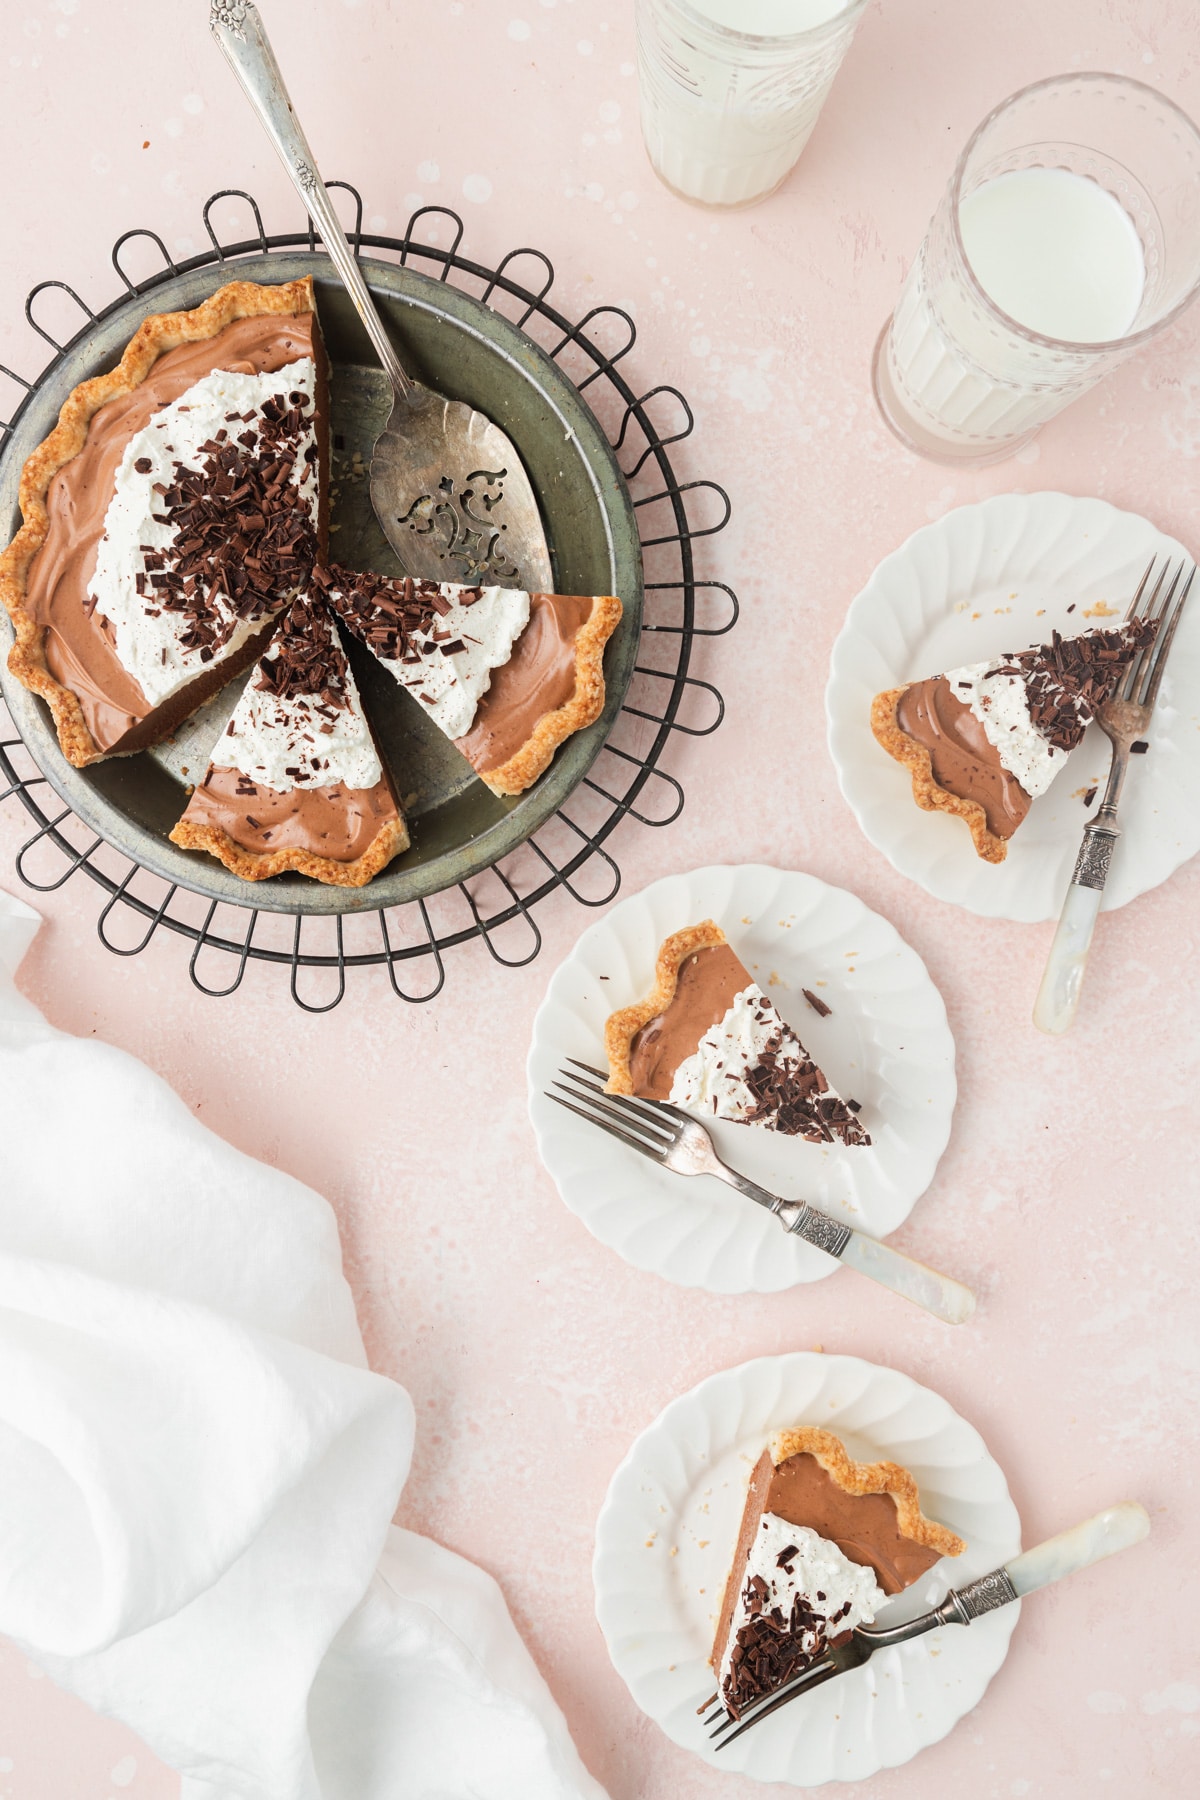 french silk pie cut into slices